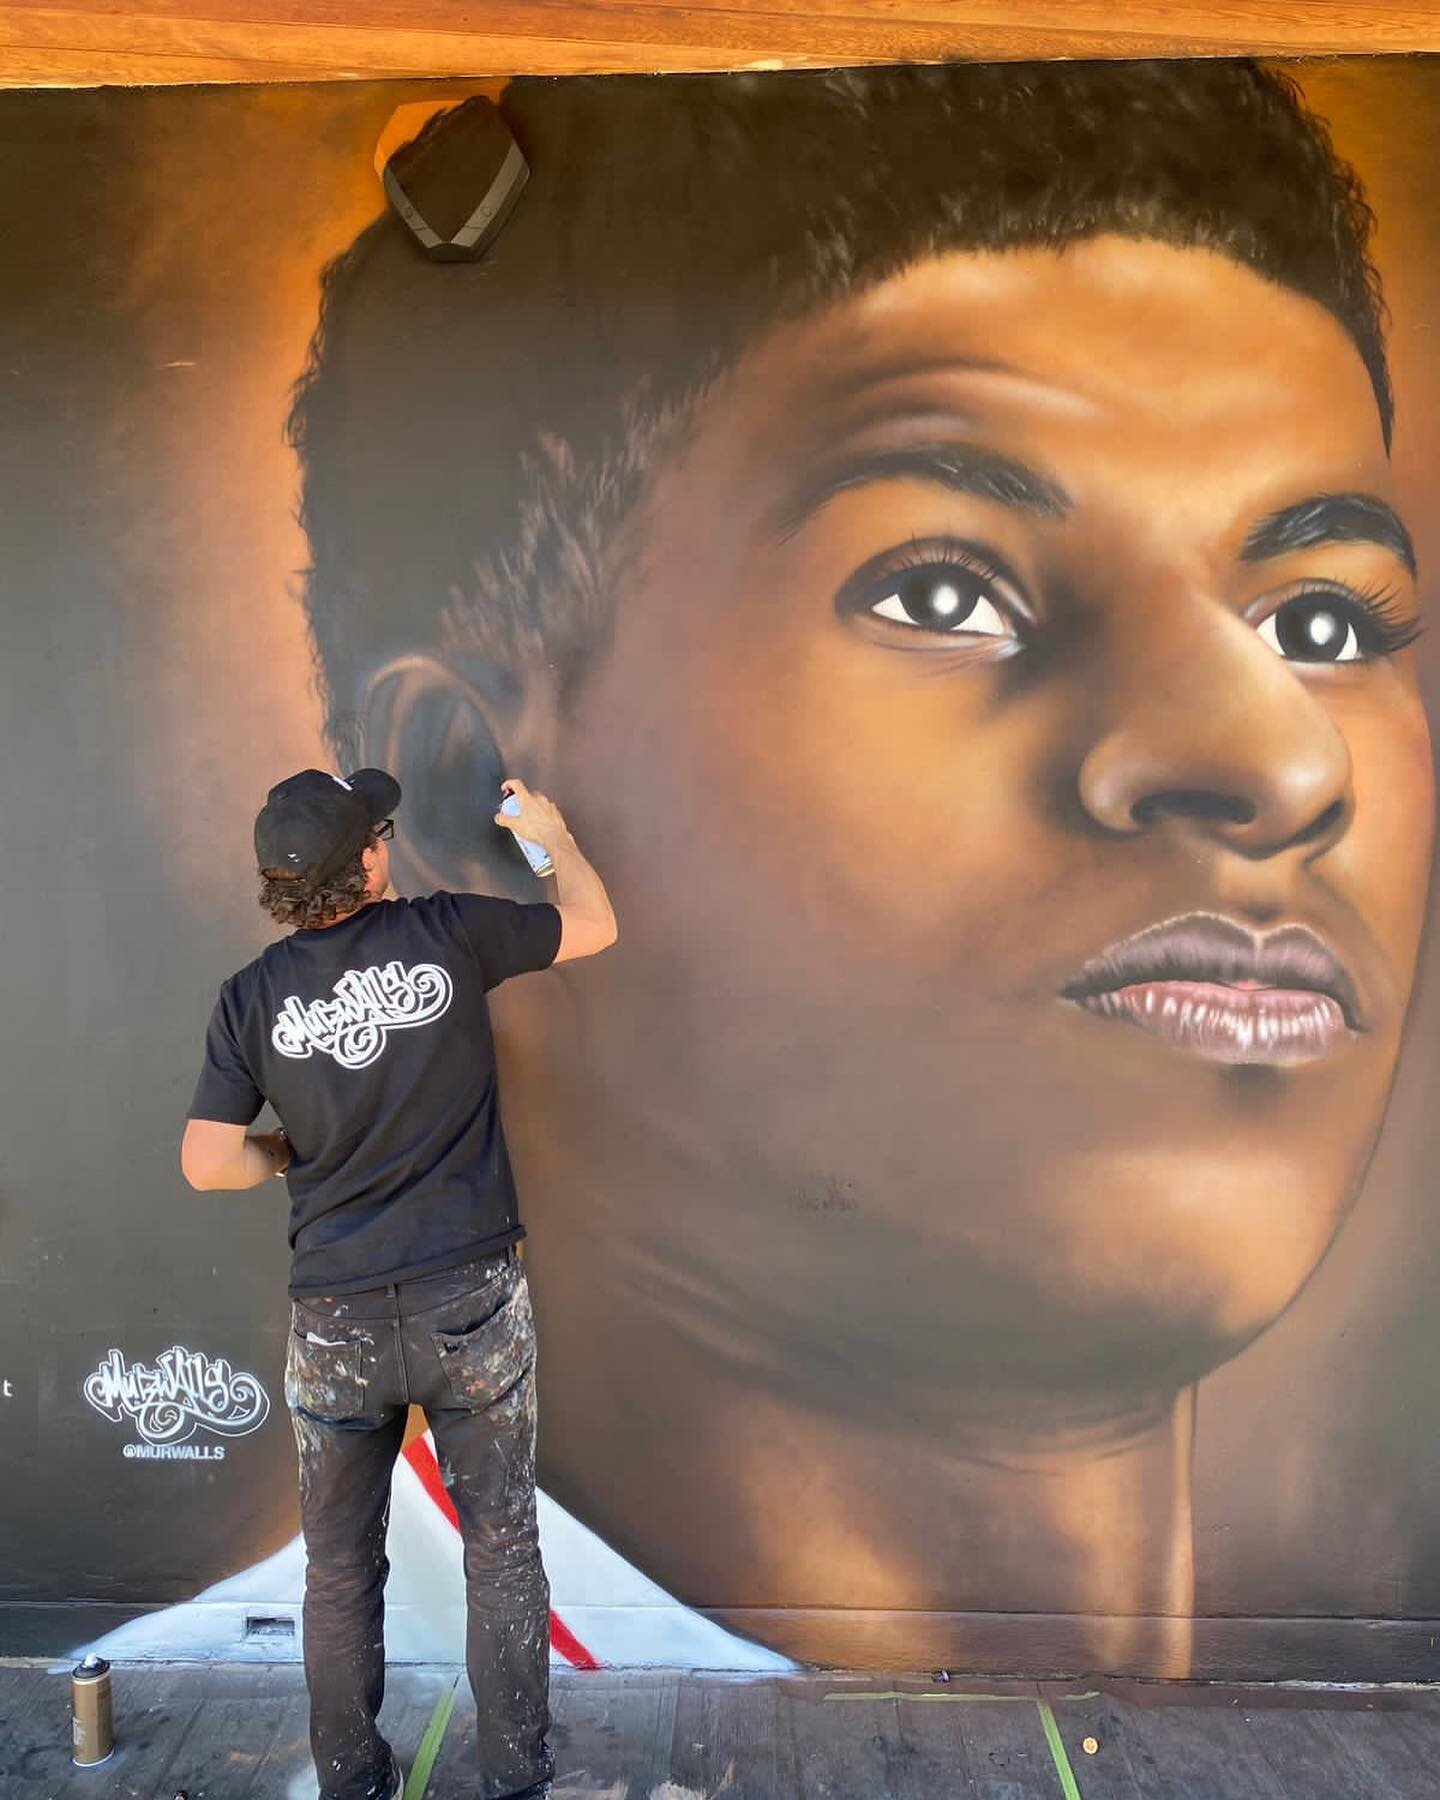 Finishing touches today on a mural based on my portrait of Marcus Rashford by team at @MurWalls at Gainsborough Primary School in East London.
Concept developed by the students after the huge benefits received for them and their families by Rashford&